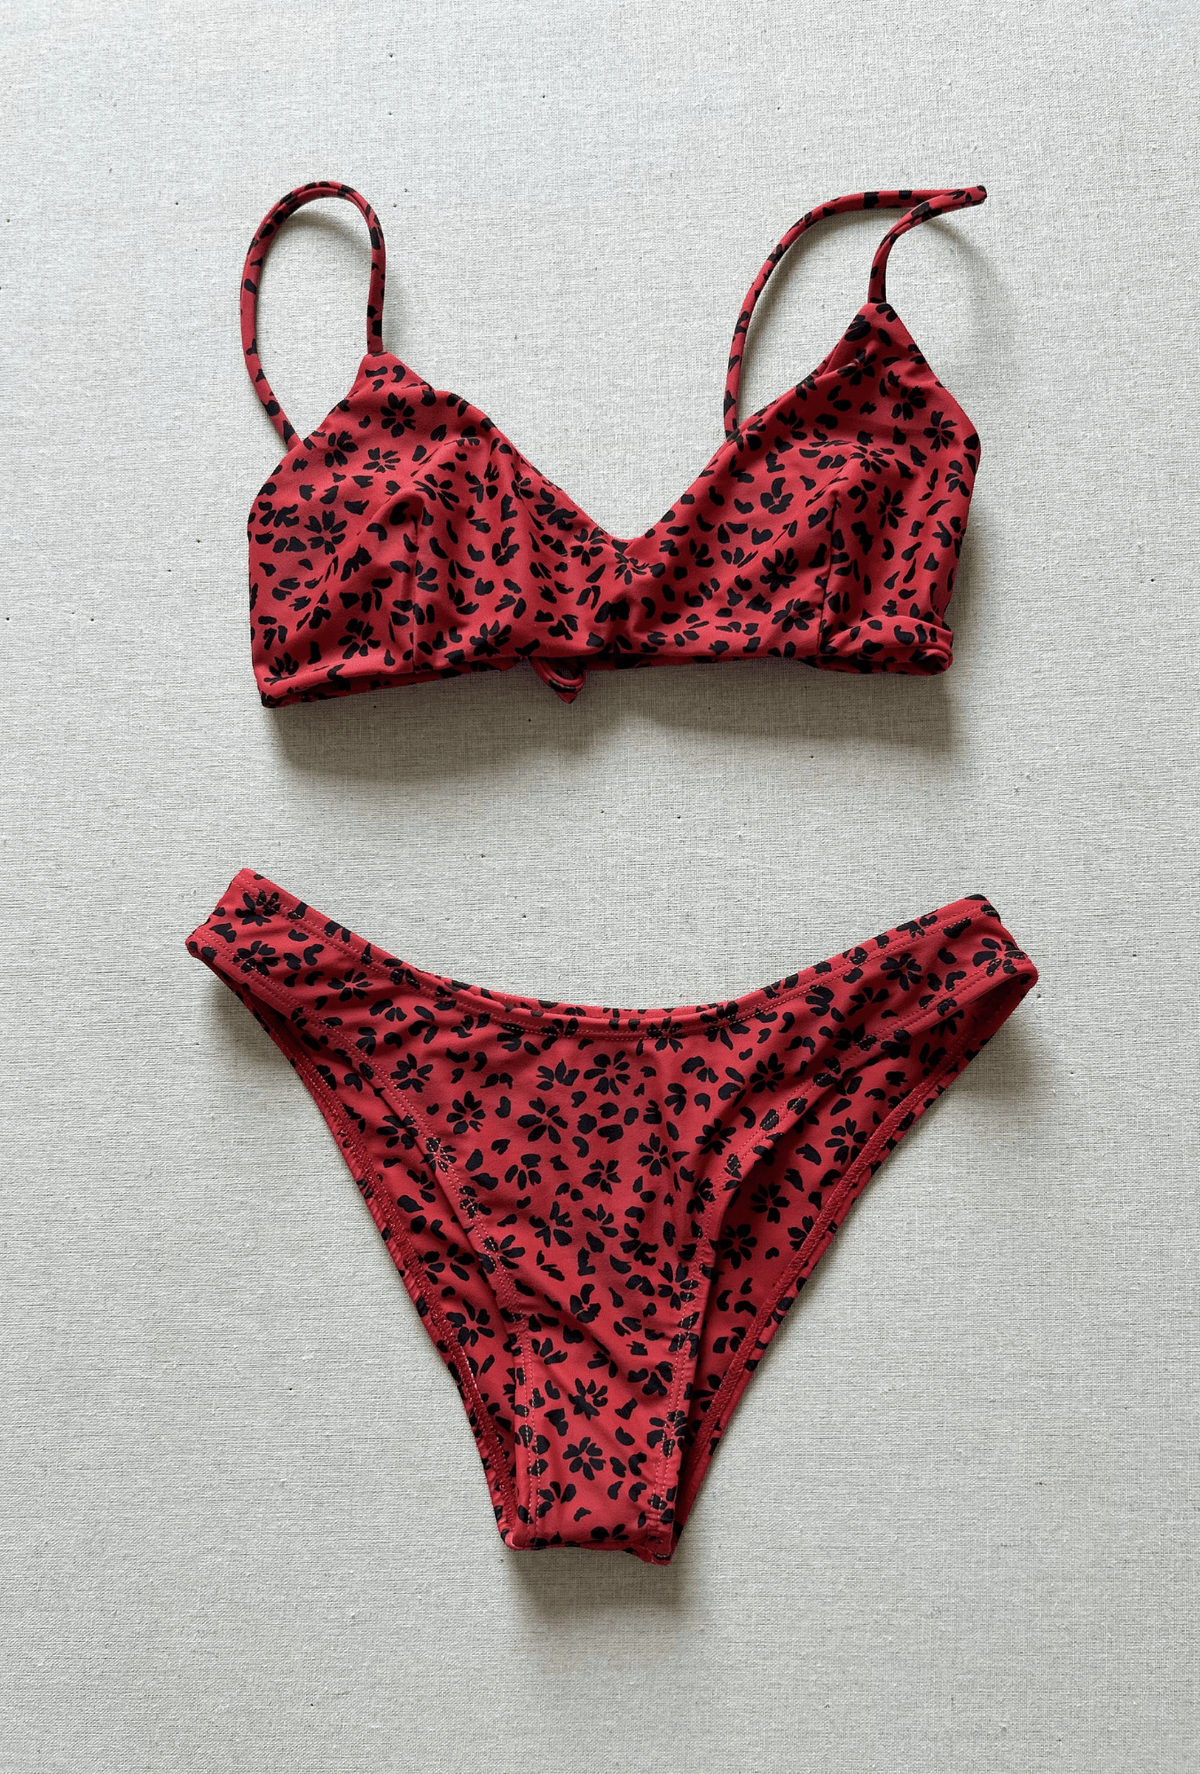 sporty top / sporty bottom in red floral - size xs